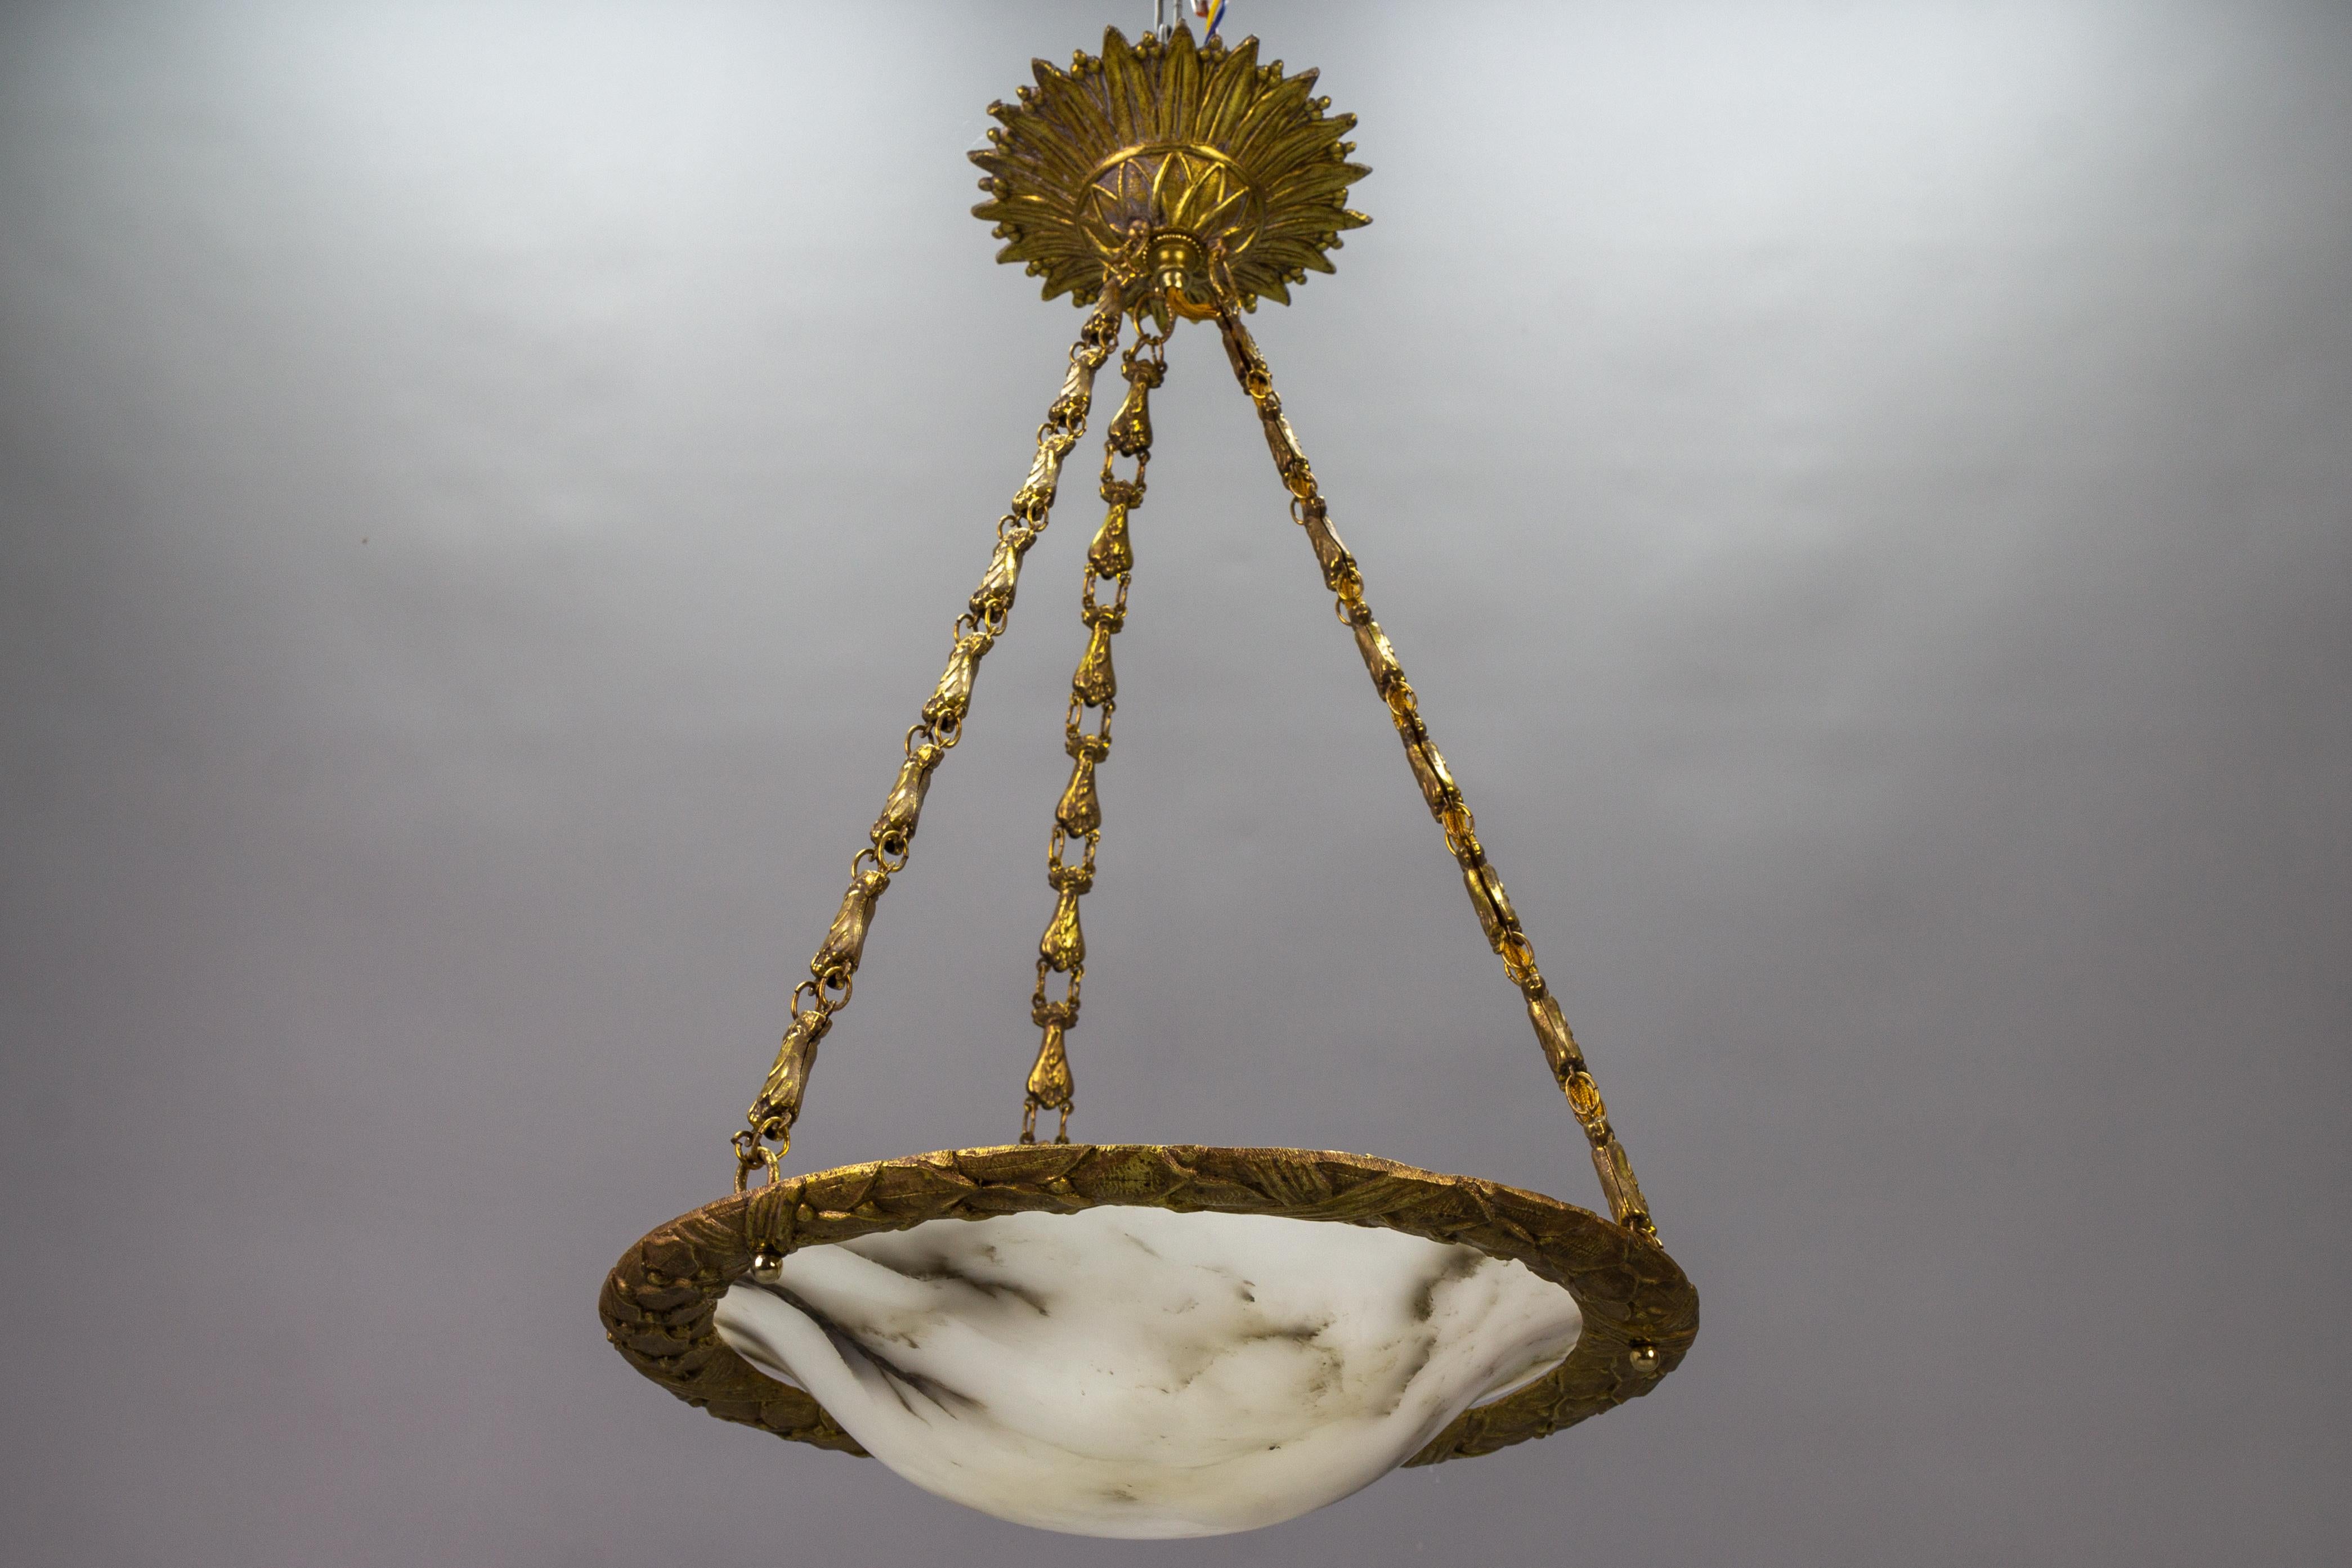 Antique French bronze, brass, and alabaster pendant light from ca. 1920.
This adorable Art Deco French pendant light features a soft white alabaster lampshade - bowl with dark veins in an ornate bronze rim, hung on three decorative brass chains.